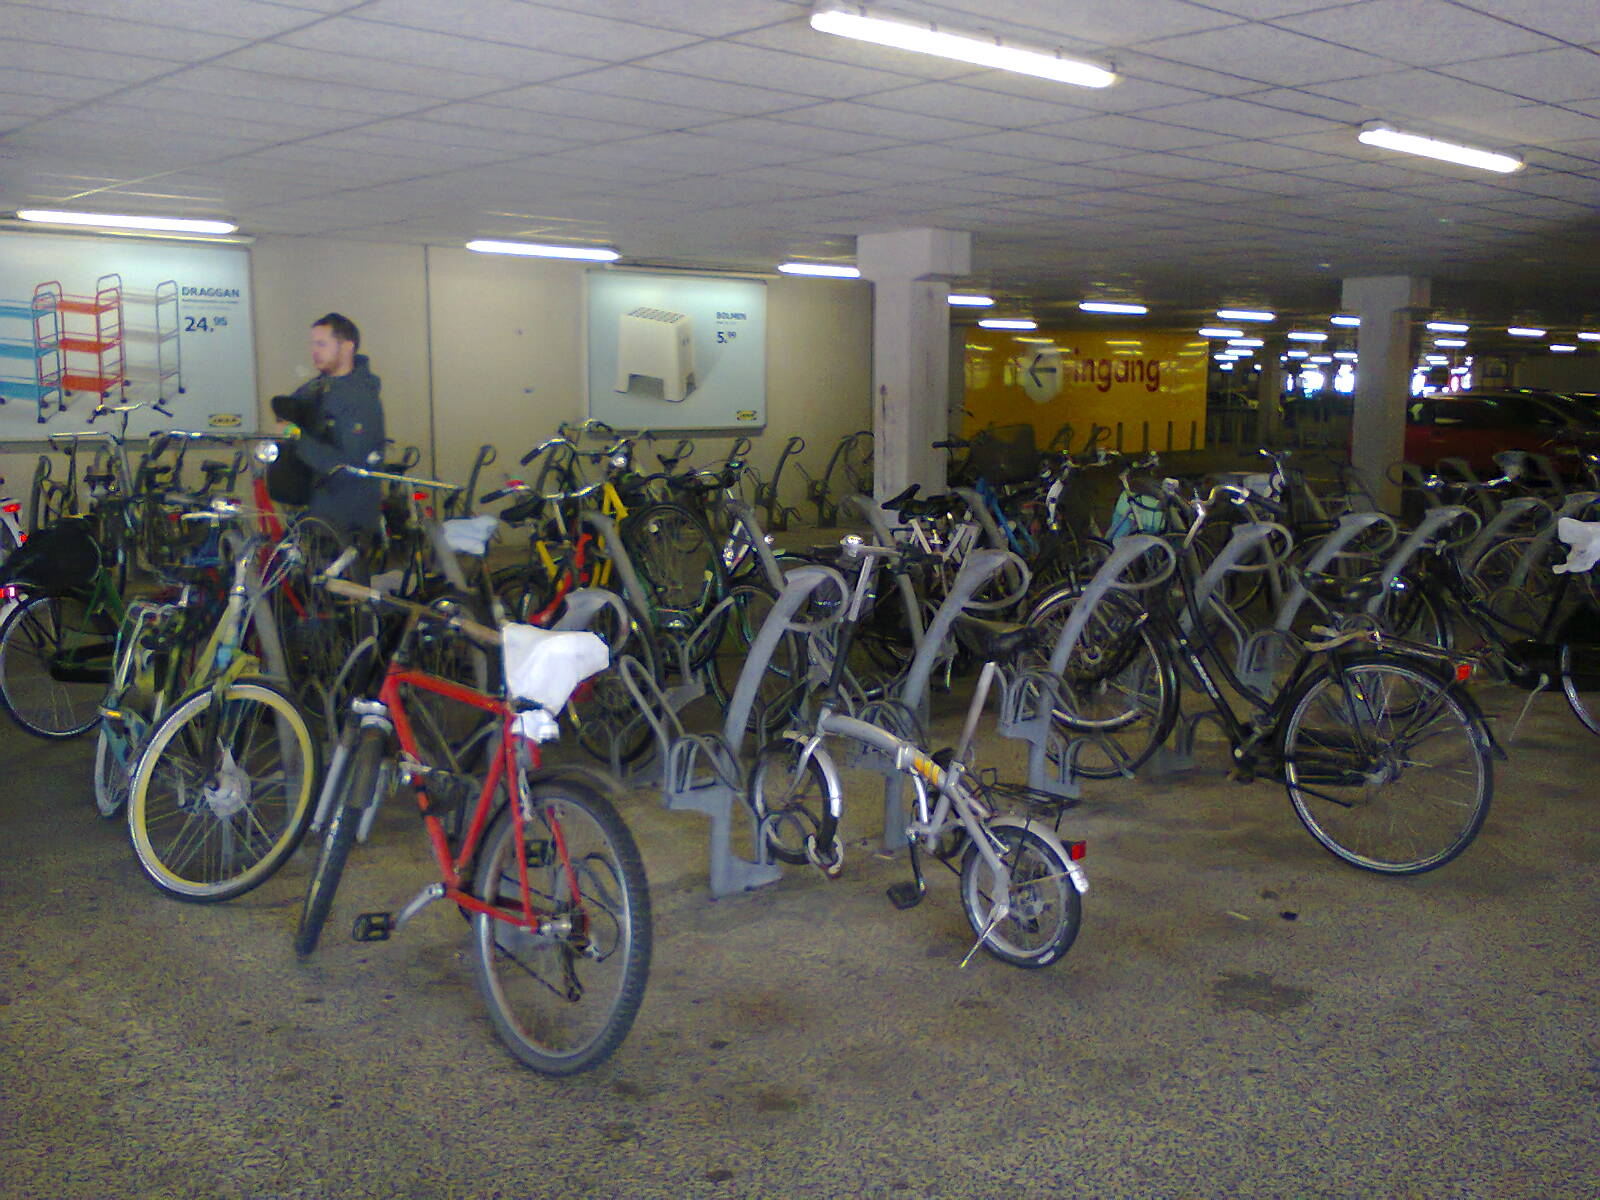 Cycle Parking at Ikea, Groningen